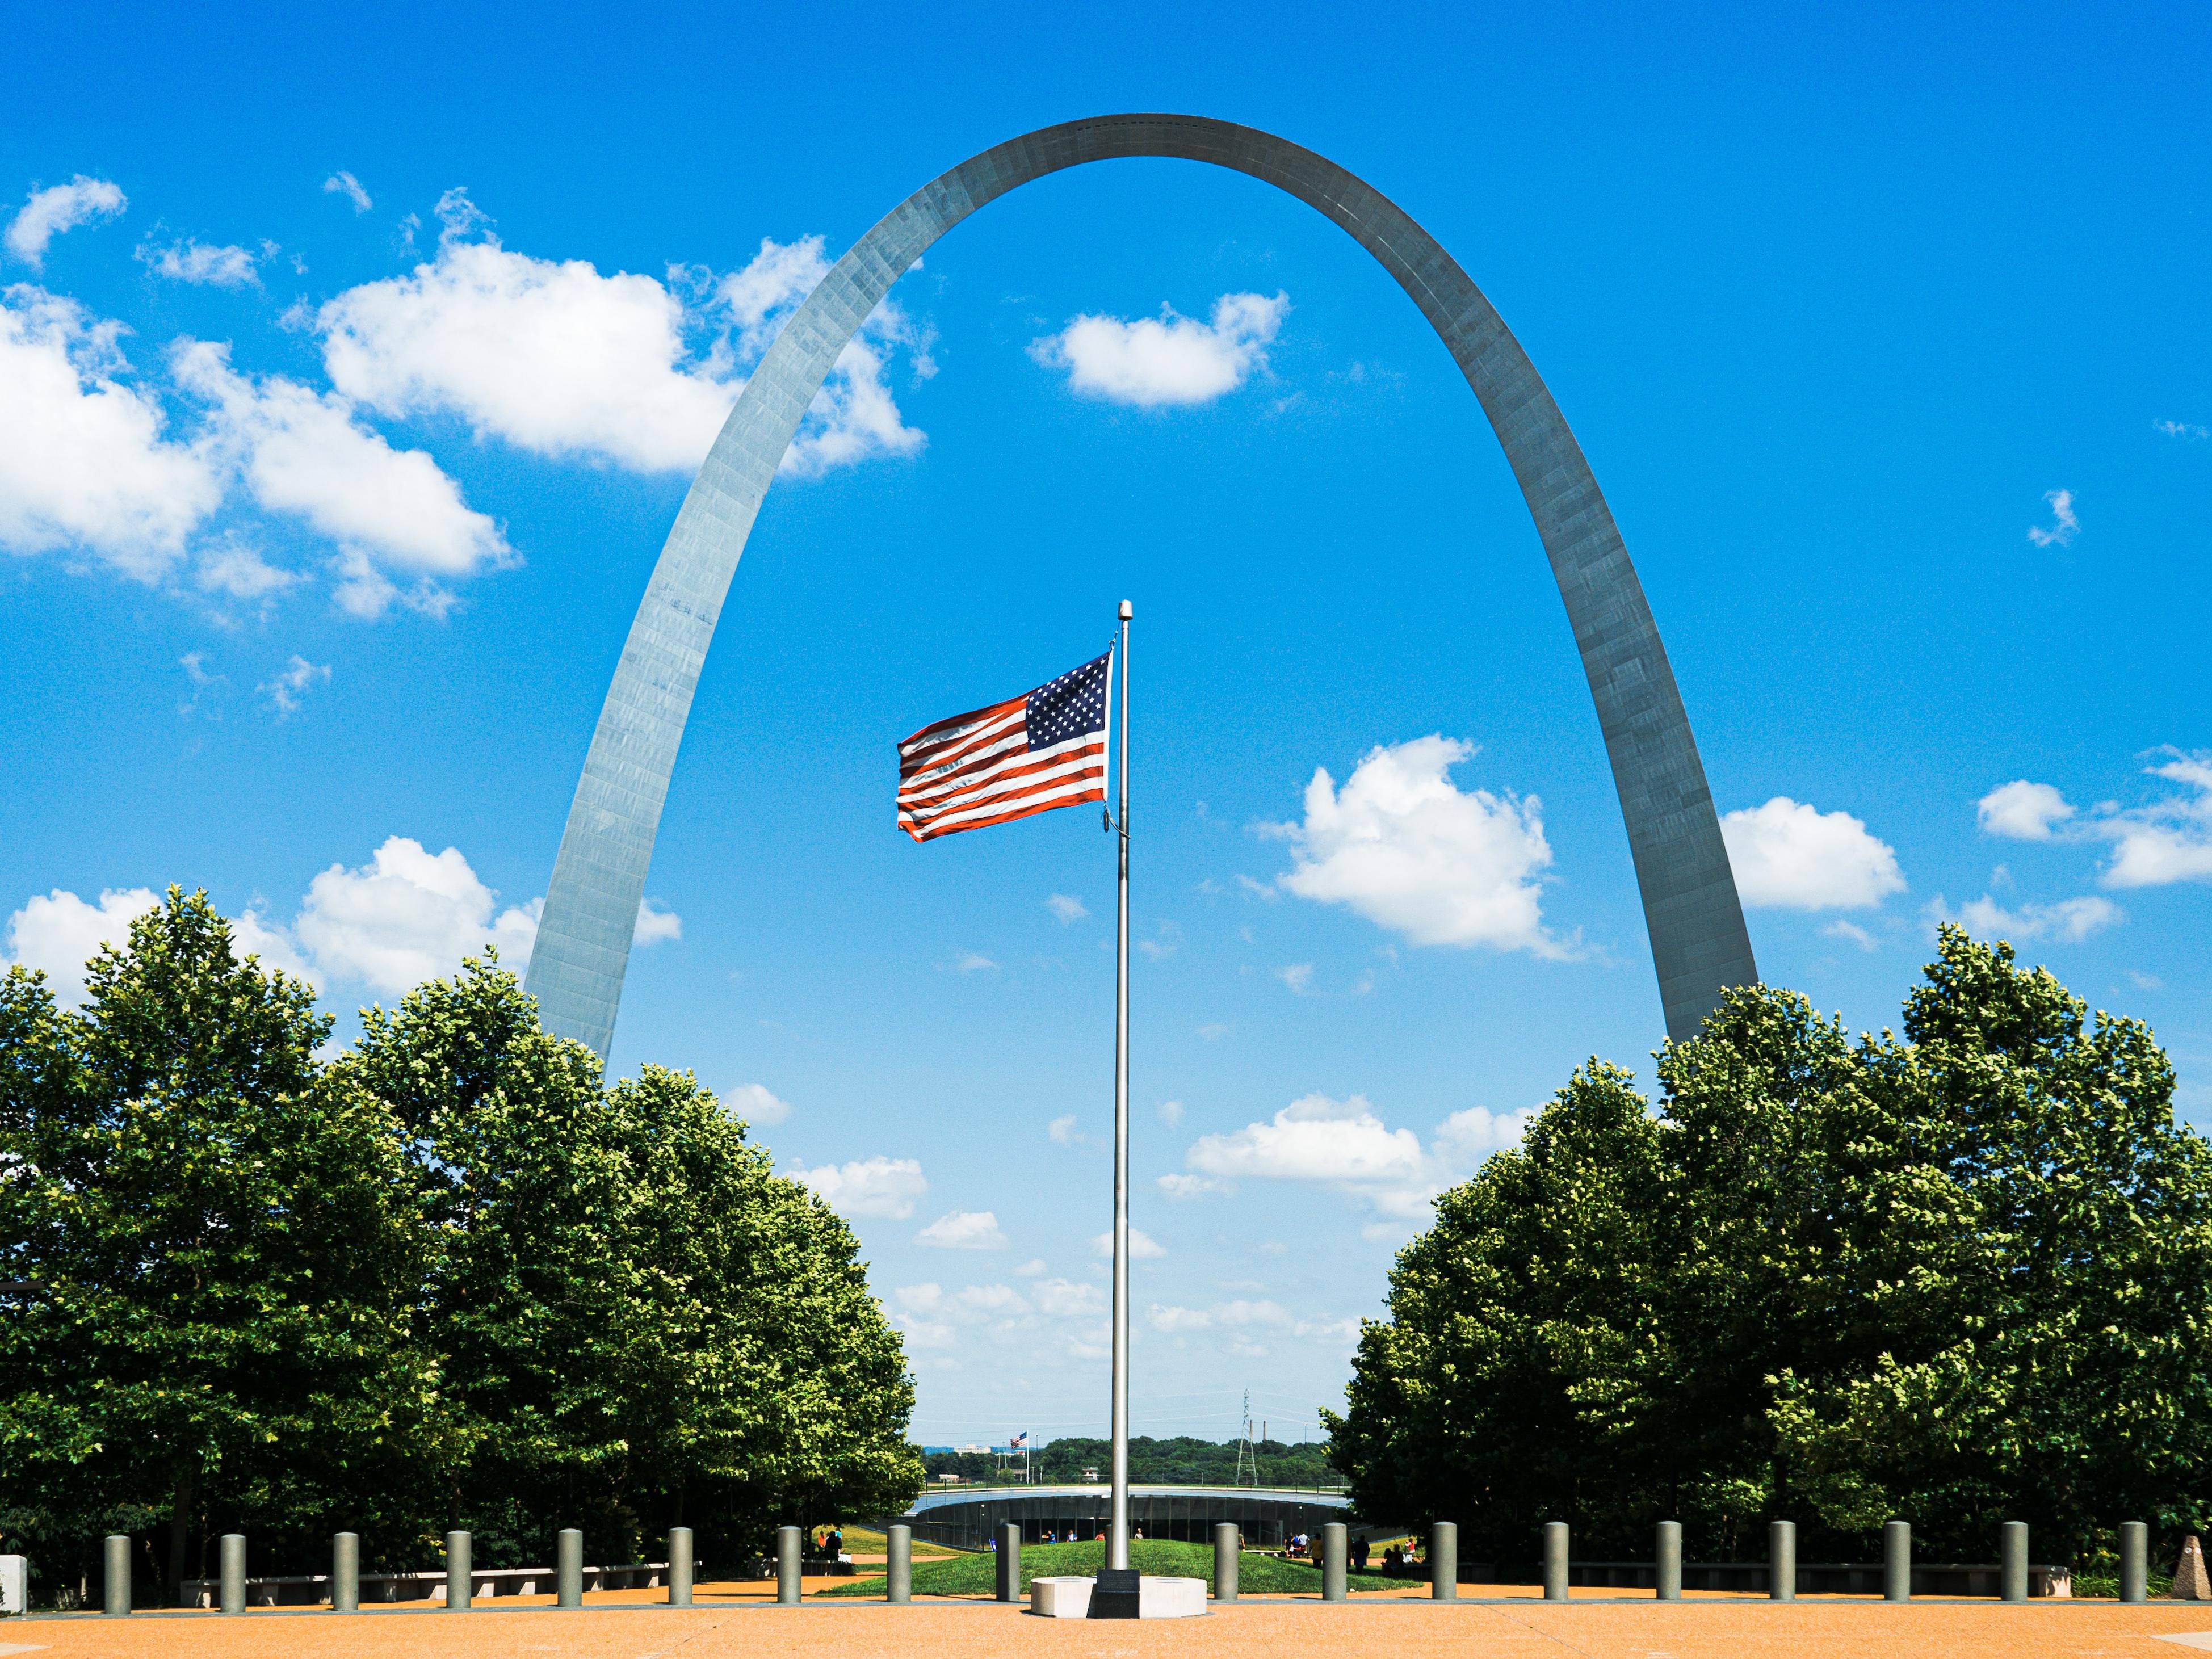 Enjoy exploring St. Louis while staying with the Holiday Inn St. Louis Downtown. We are located just blocks away from America's Center, Busch Stadium, City Museum and much more. Plan your day of sightseeing from the Arch to the Zoo all in the Lou! Book our Explore St. Louis package, includes 2 bottles of water and an Explore St. Louis guide. 